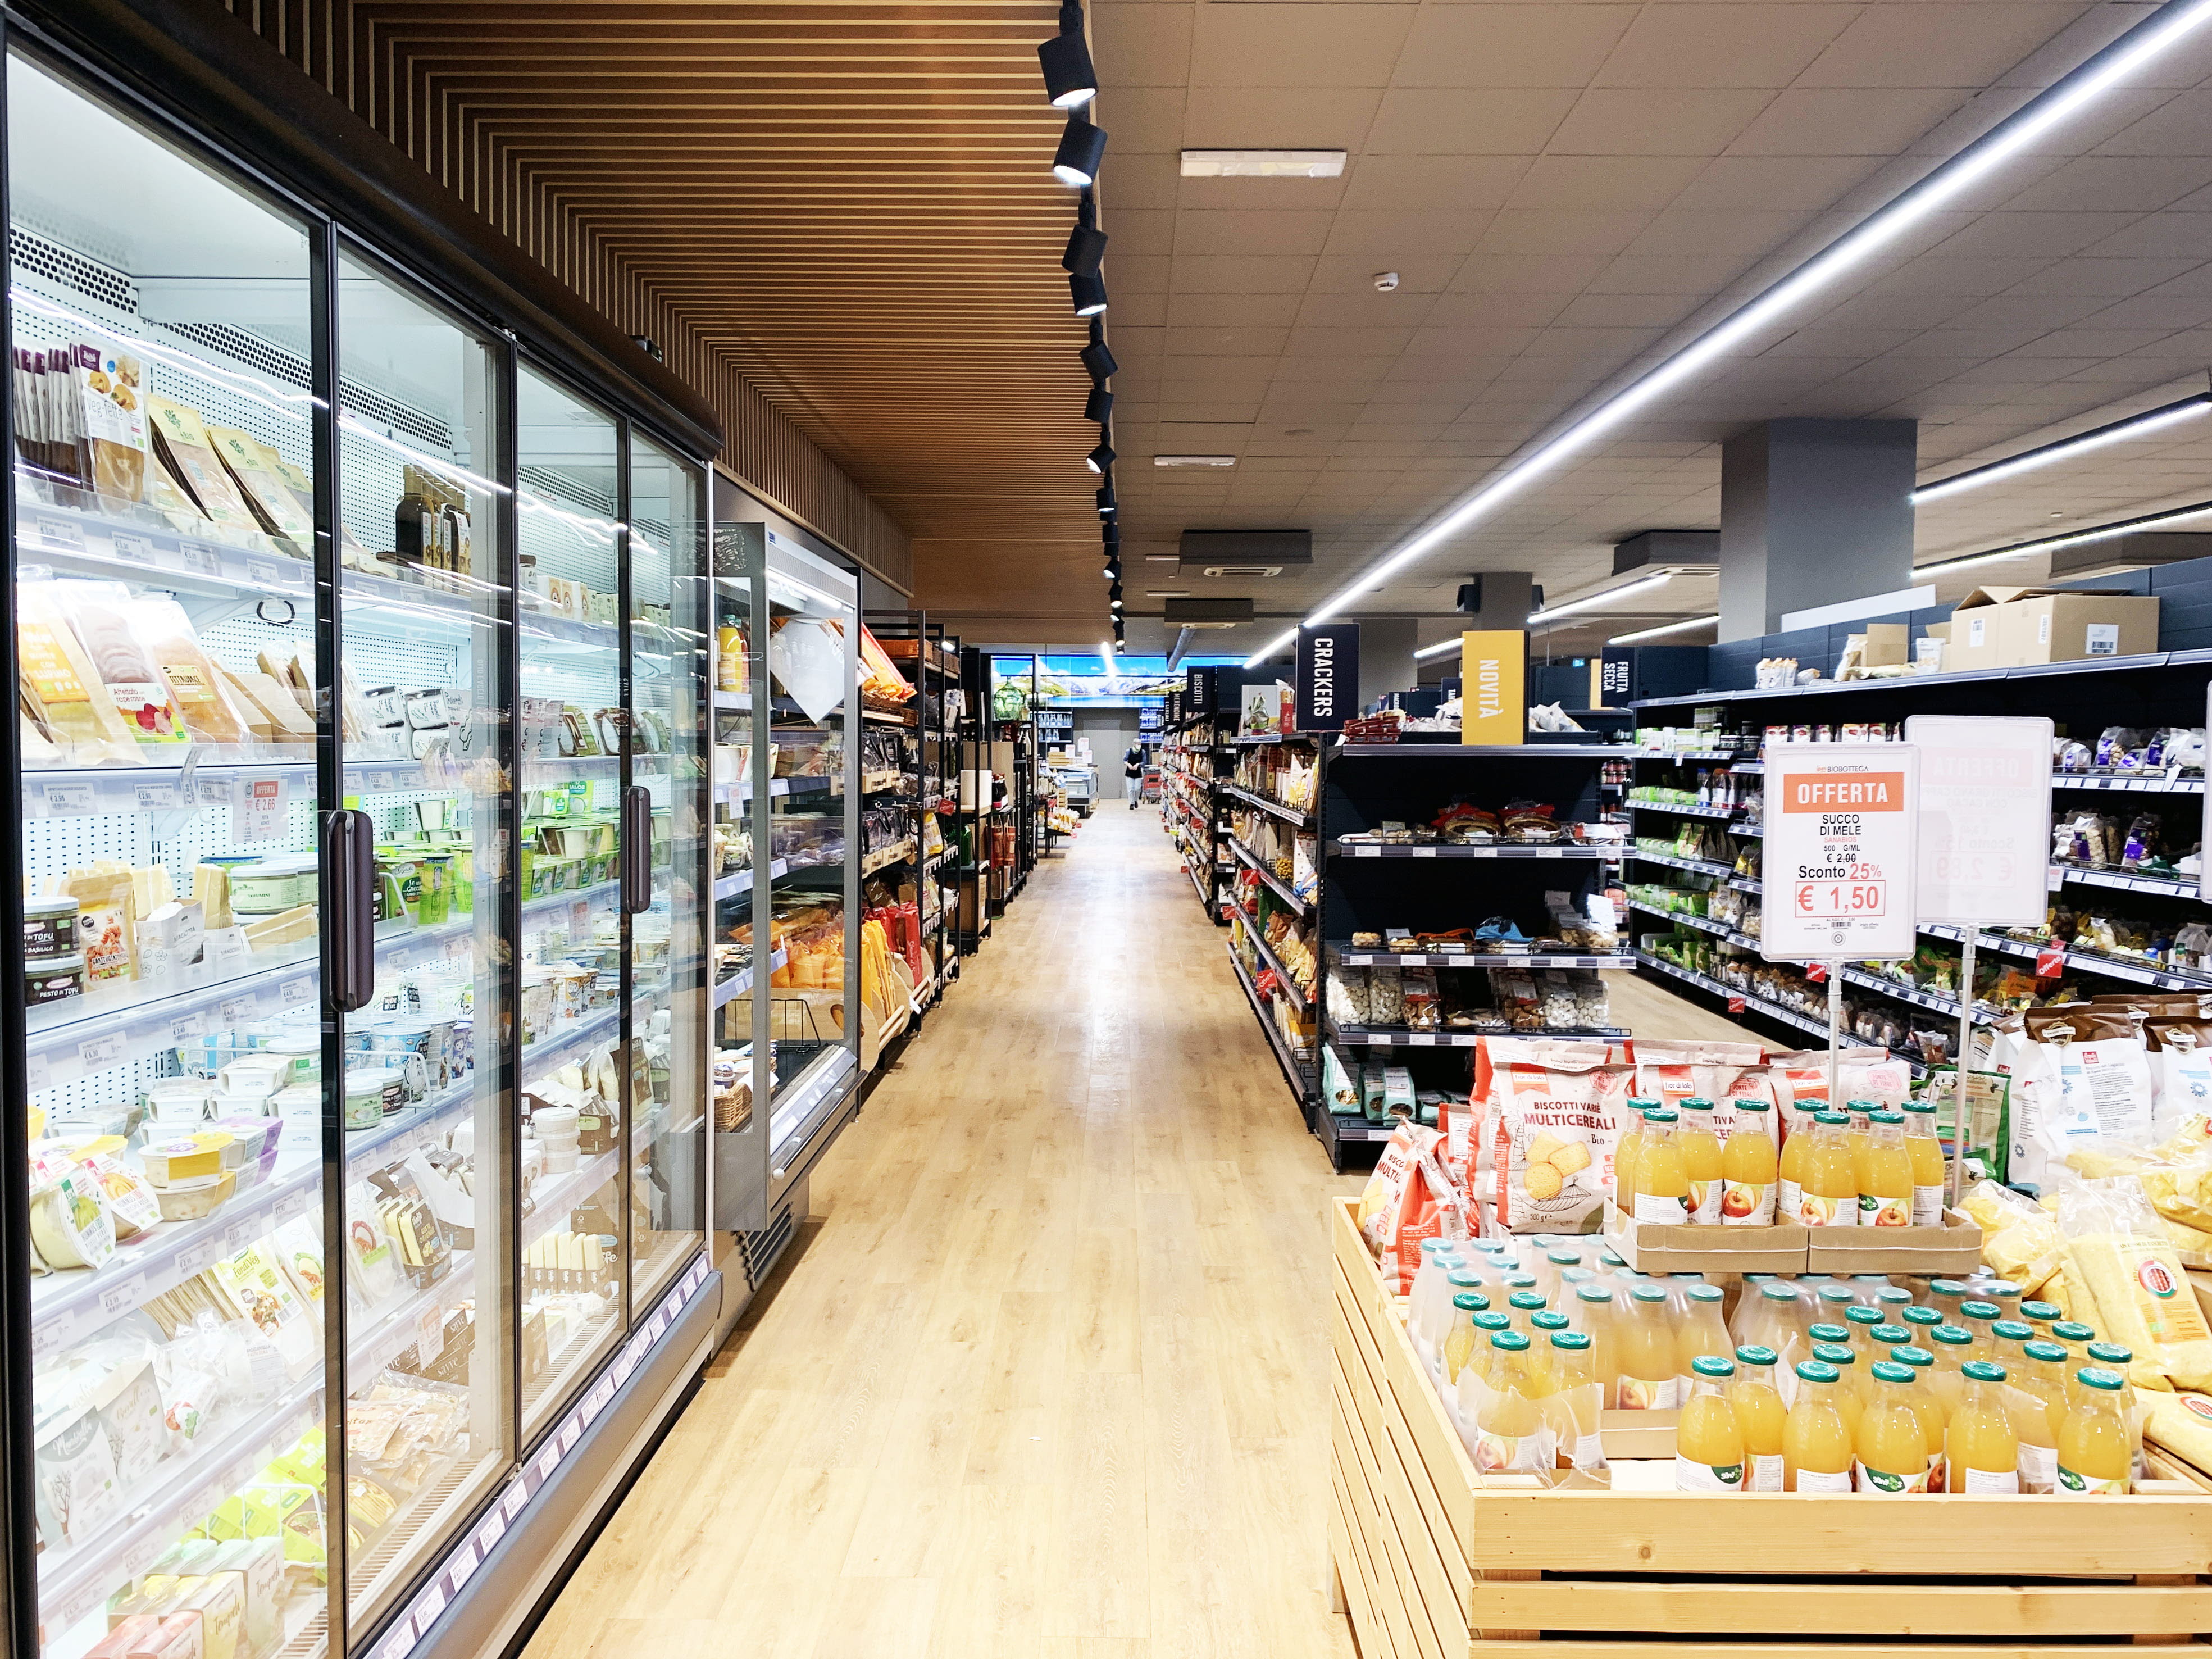 Professional solution design for retail_Shelving for supermarket grocery store_BIOBOTTEGA_AOSTA_ITALY